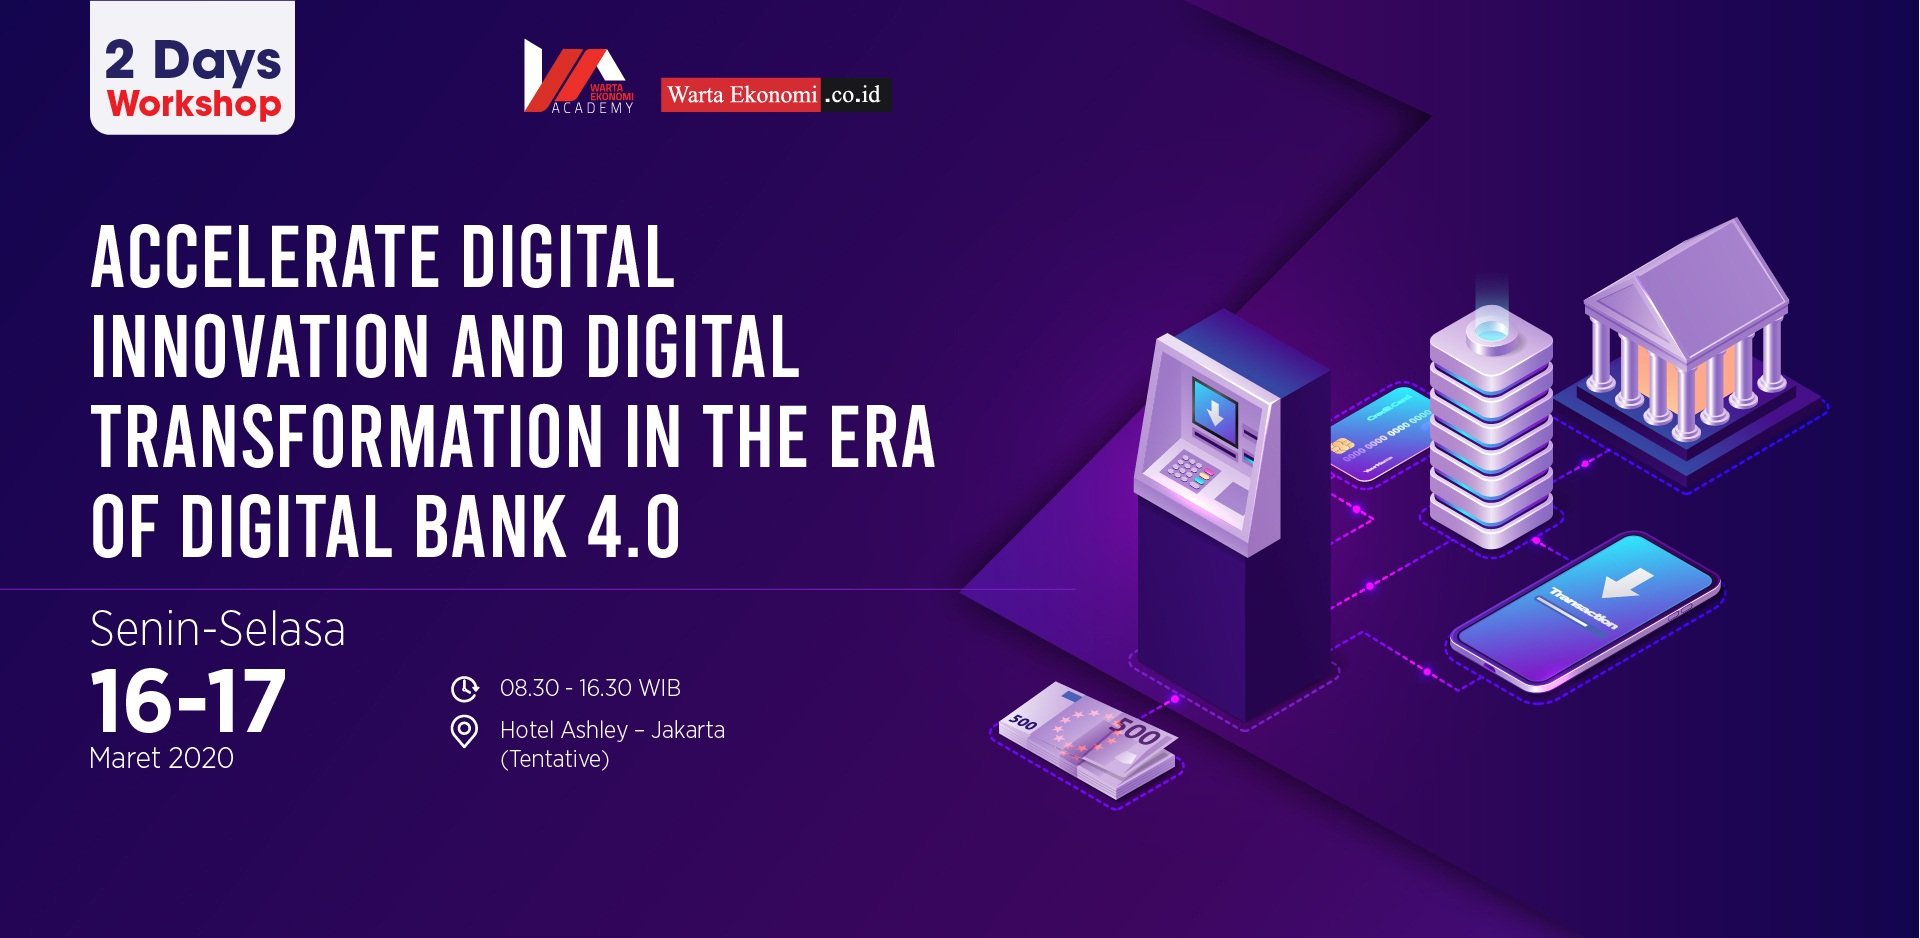 Accelerate Digital Innovation And Digital Transformation In The Era Of Digital Bank 4.0